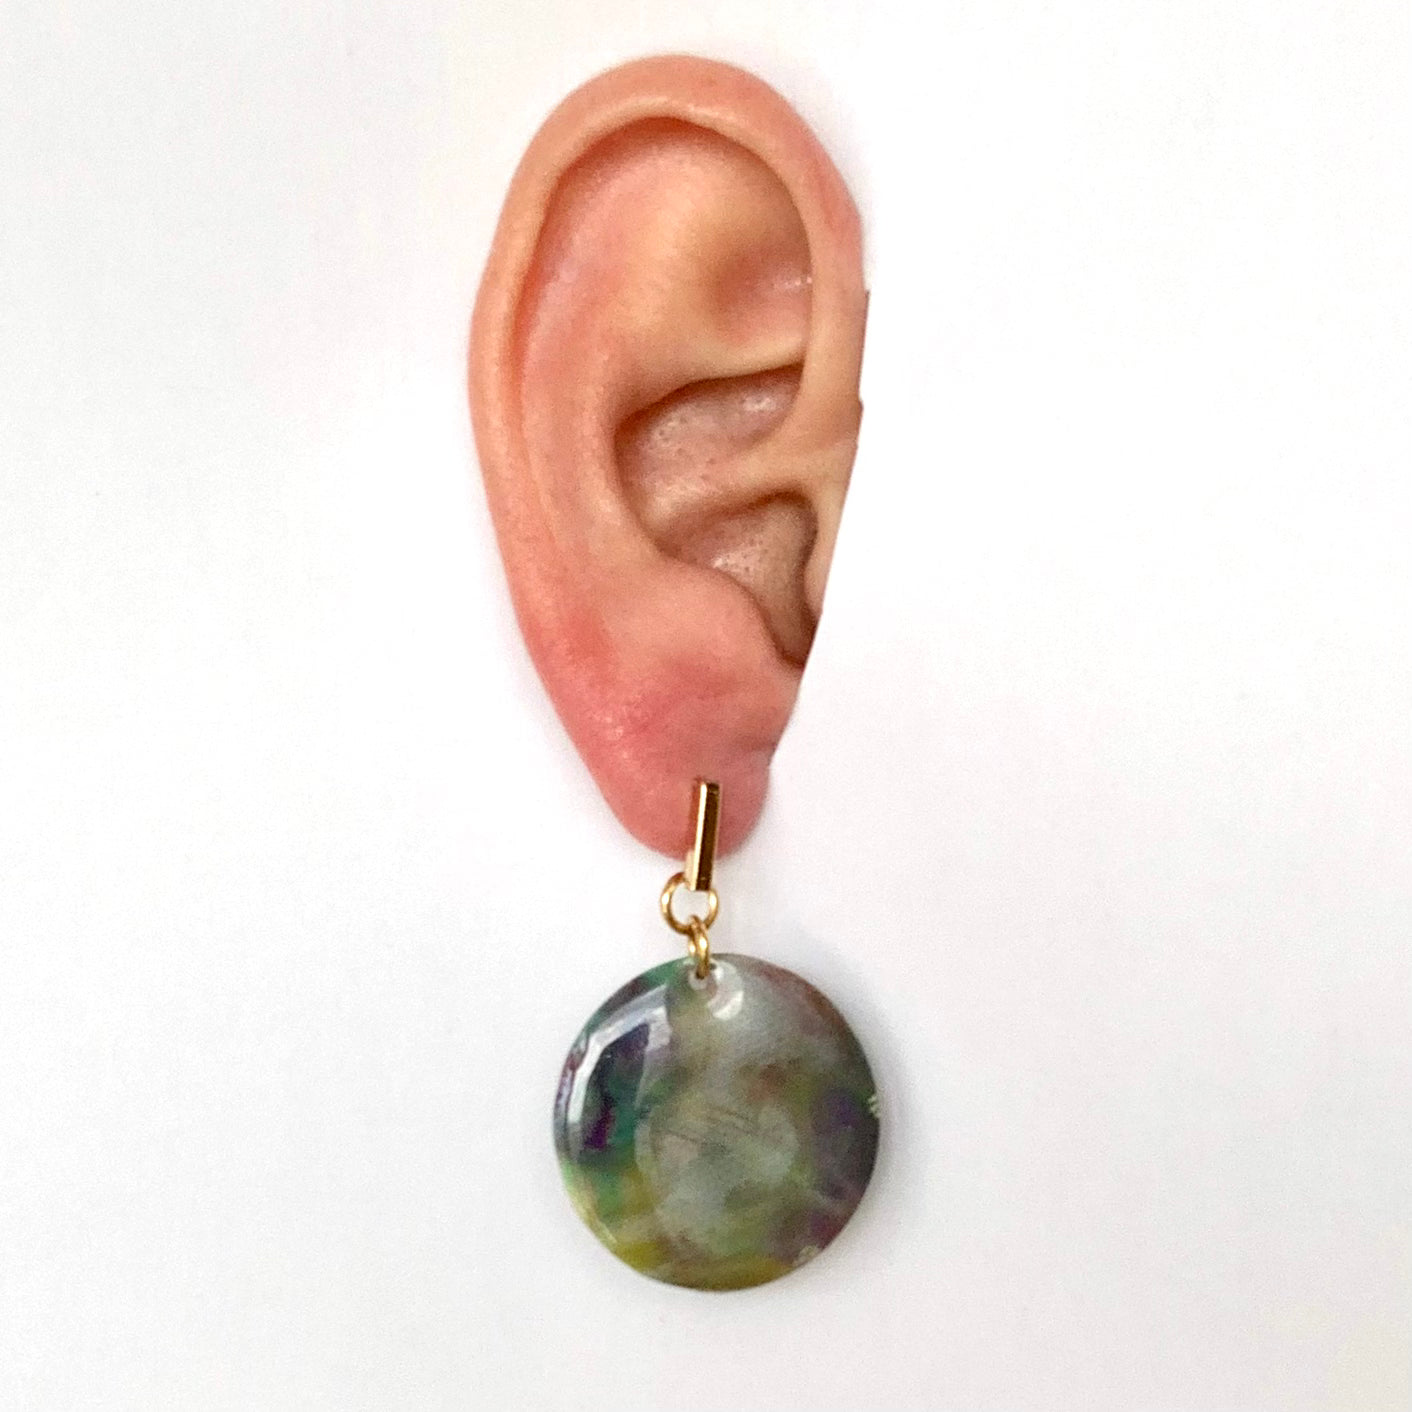 Handmade earrings from recycled materials green purple